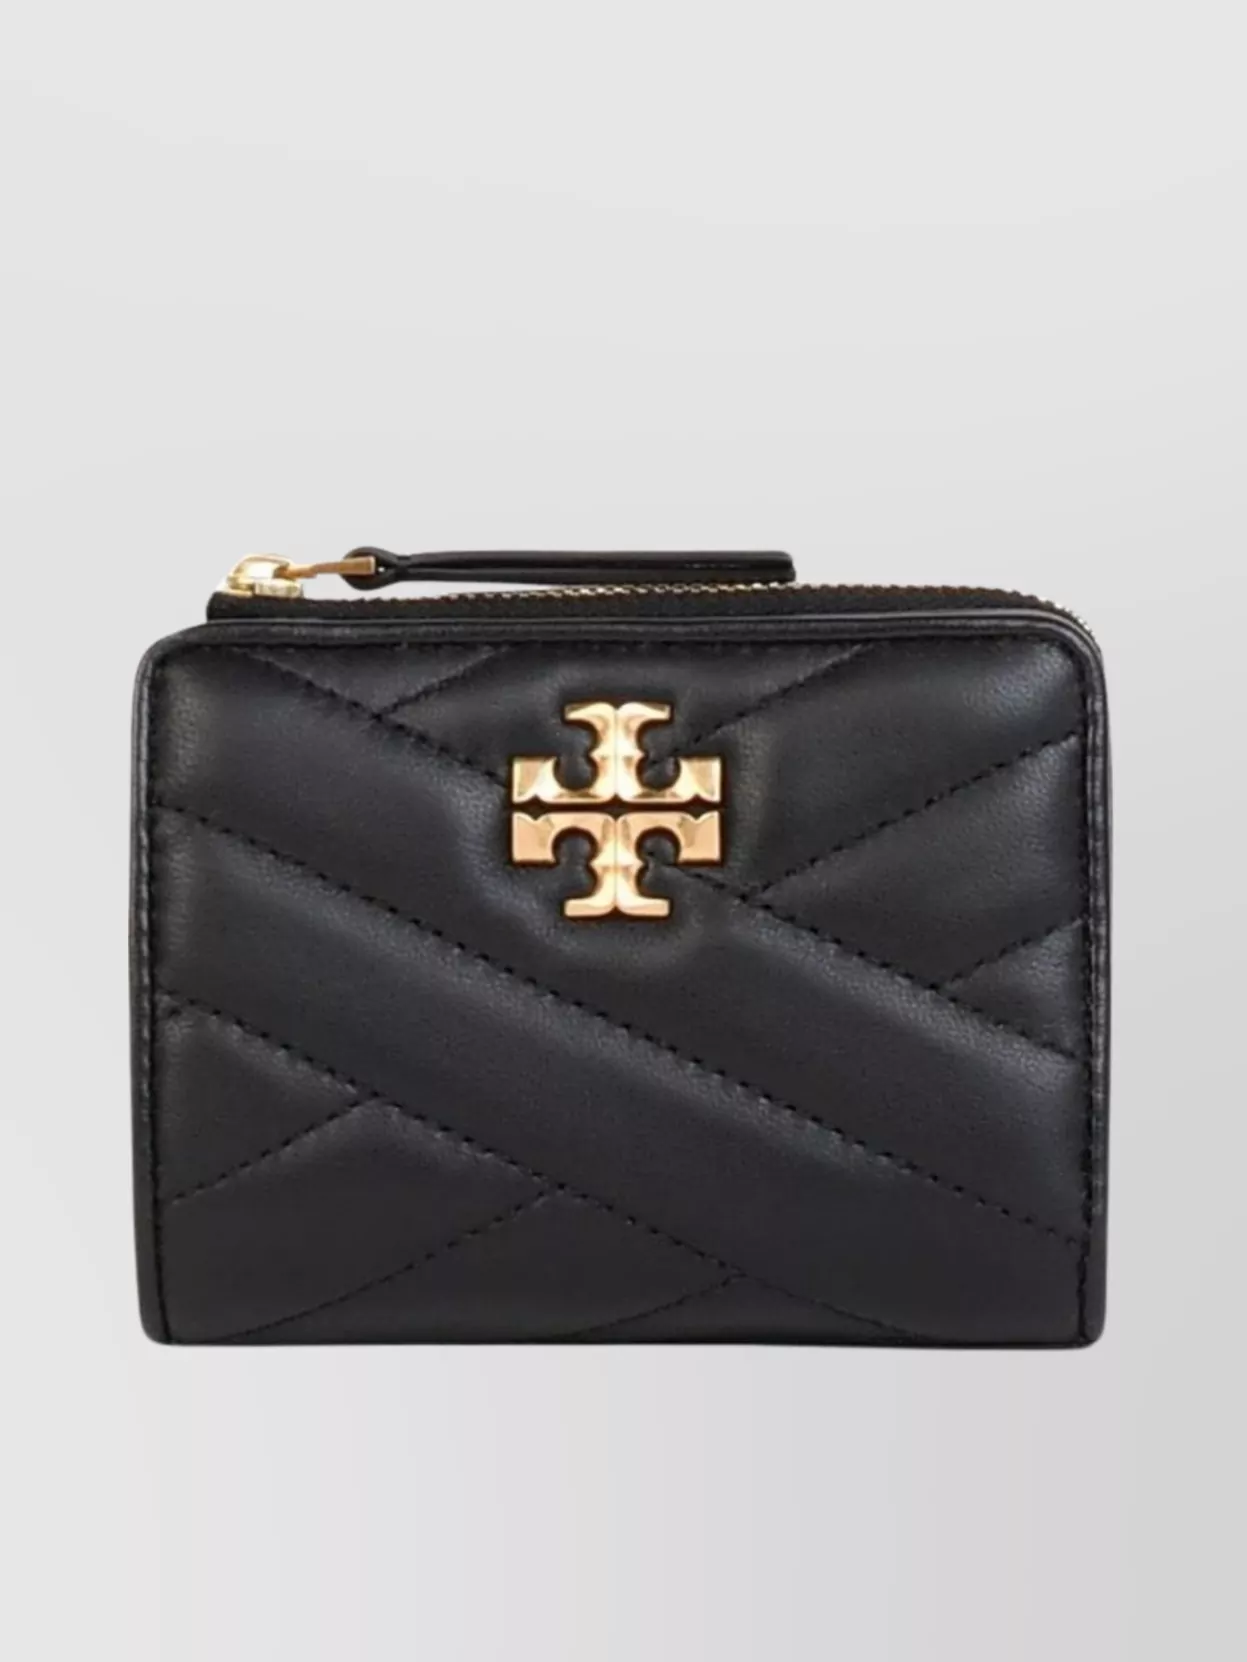 Tory Burch 'kira' Quilted Leather Wallet